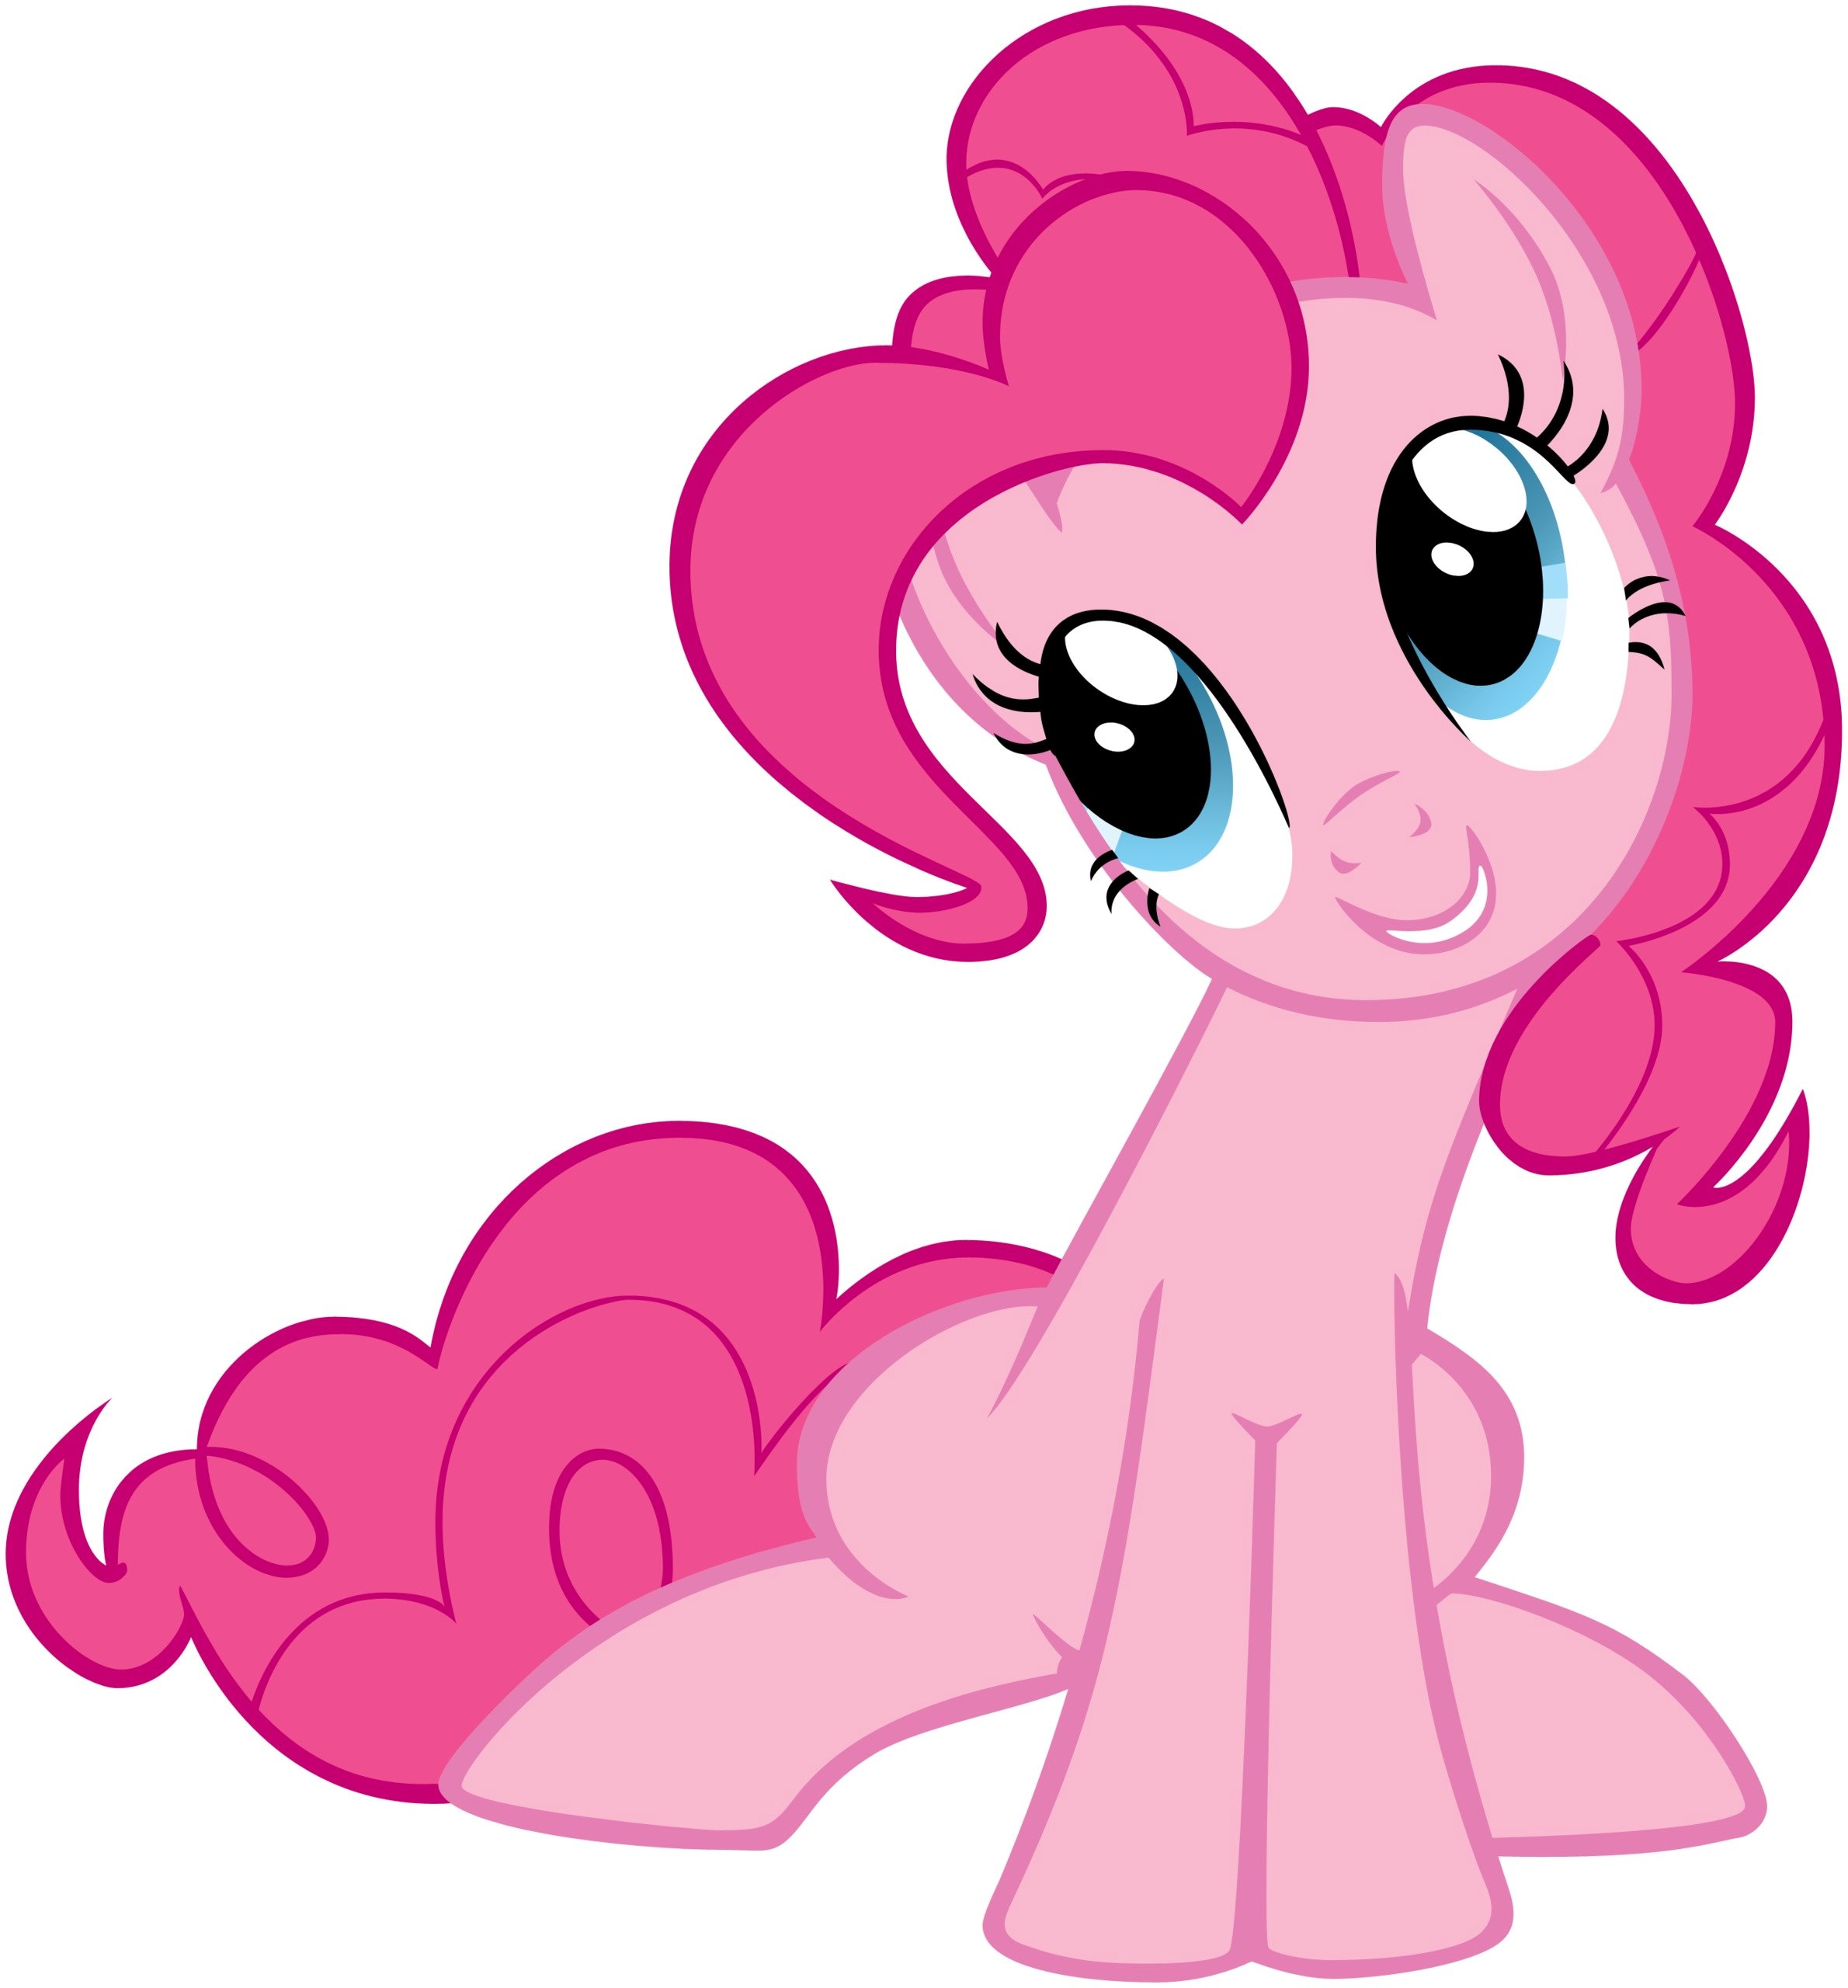 brenda plante recommends pinkie pie pictures pic